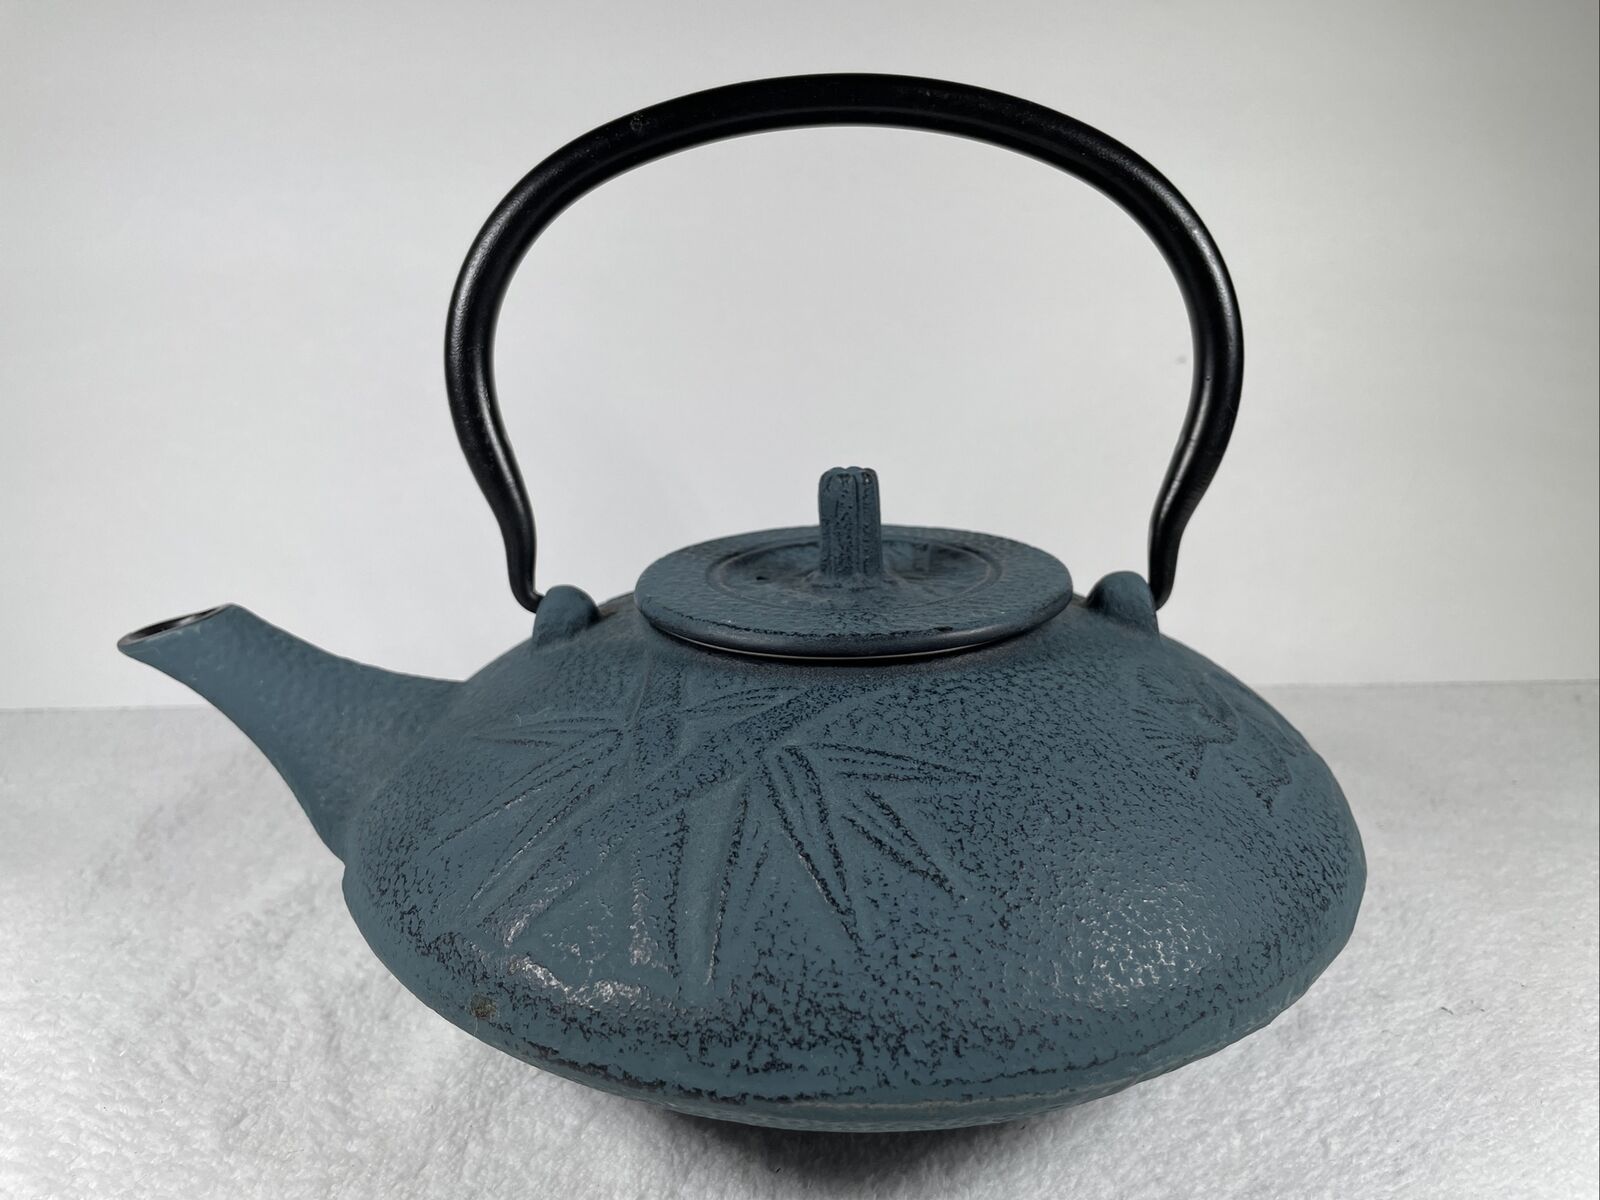 Unity Tetsubin Cast Iron Teapot Blue Black Bamboo Floral With Strainer